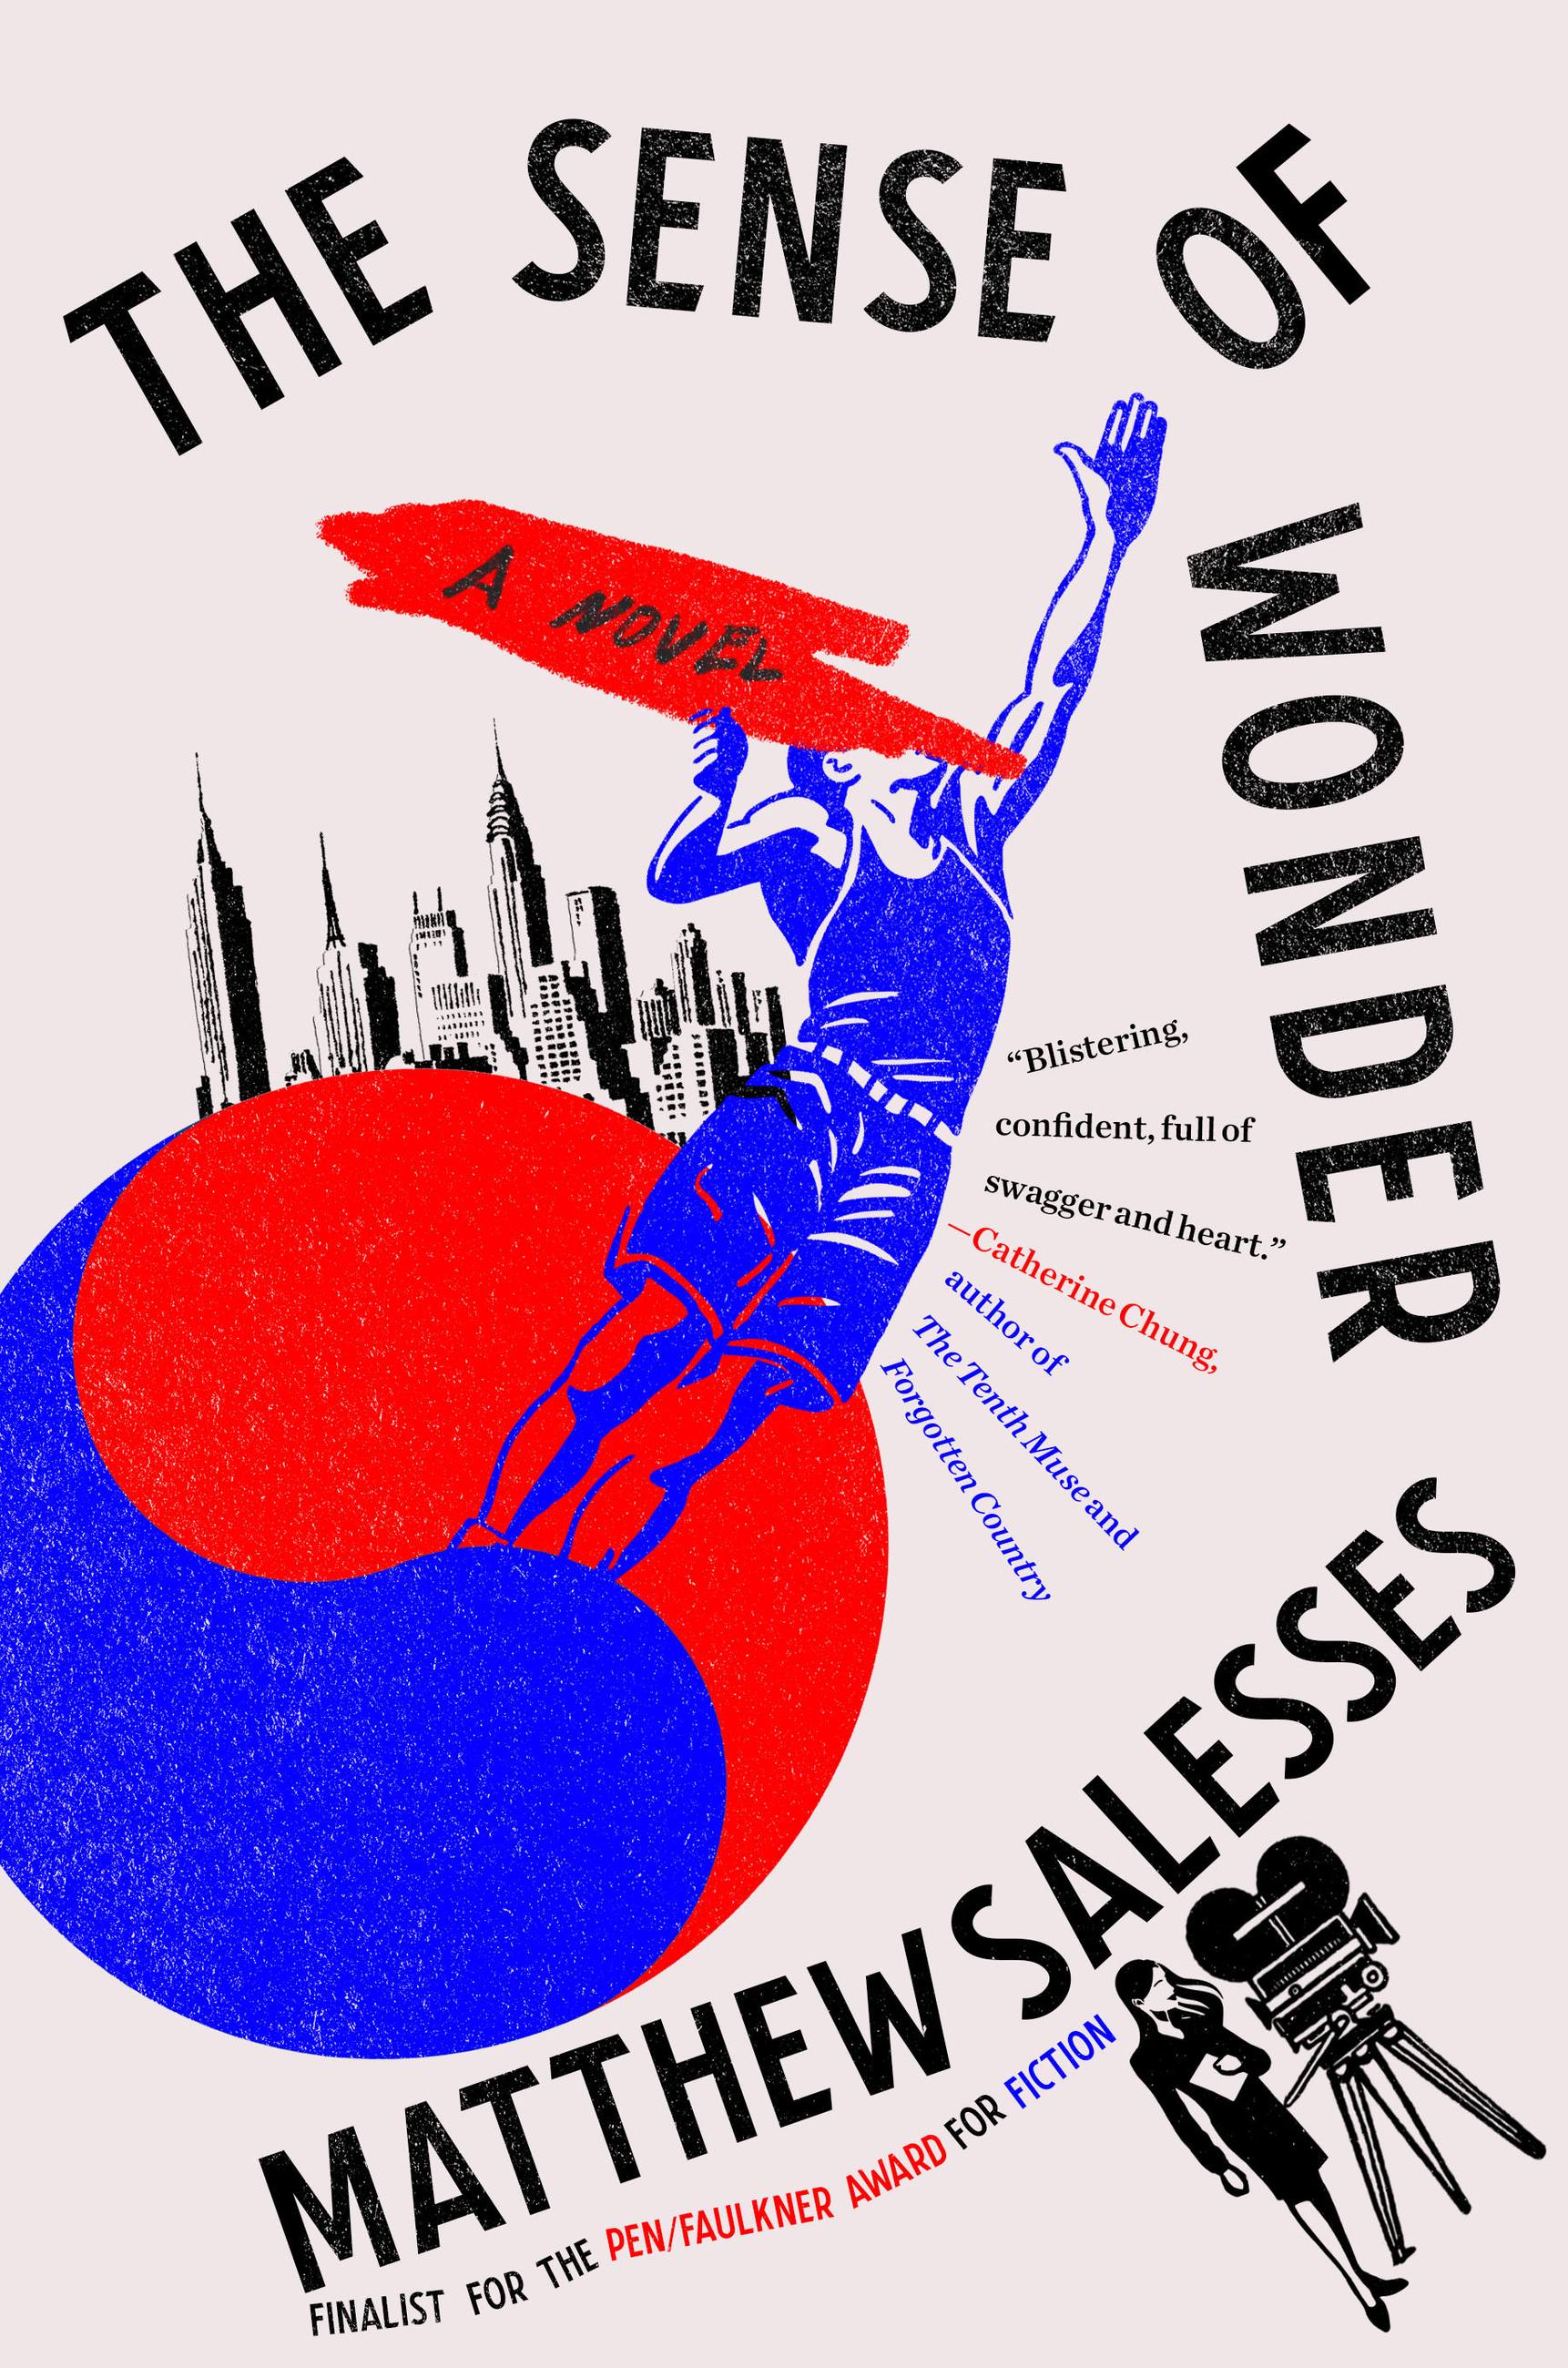 wonder or wander: remember the difference